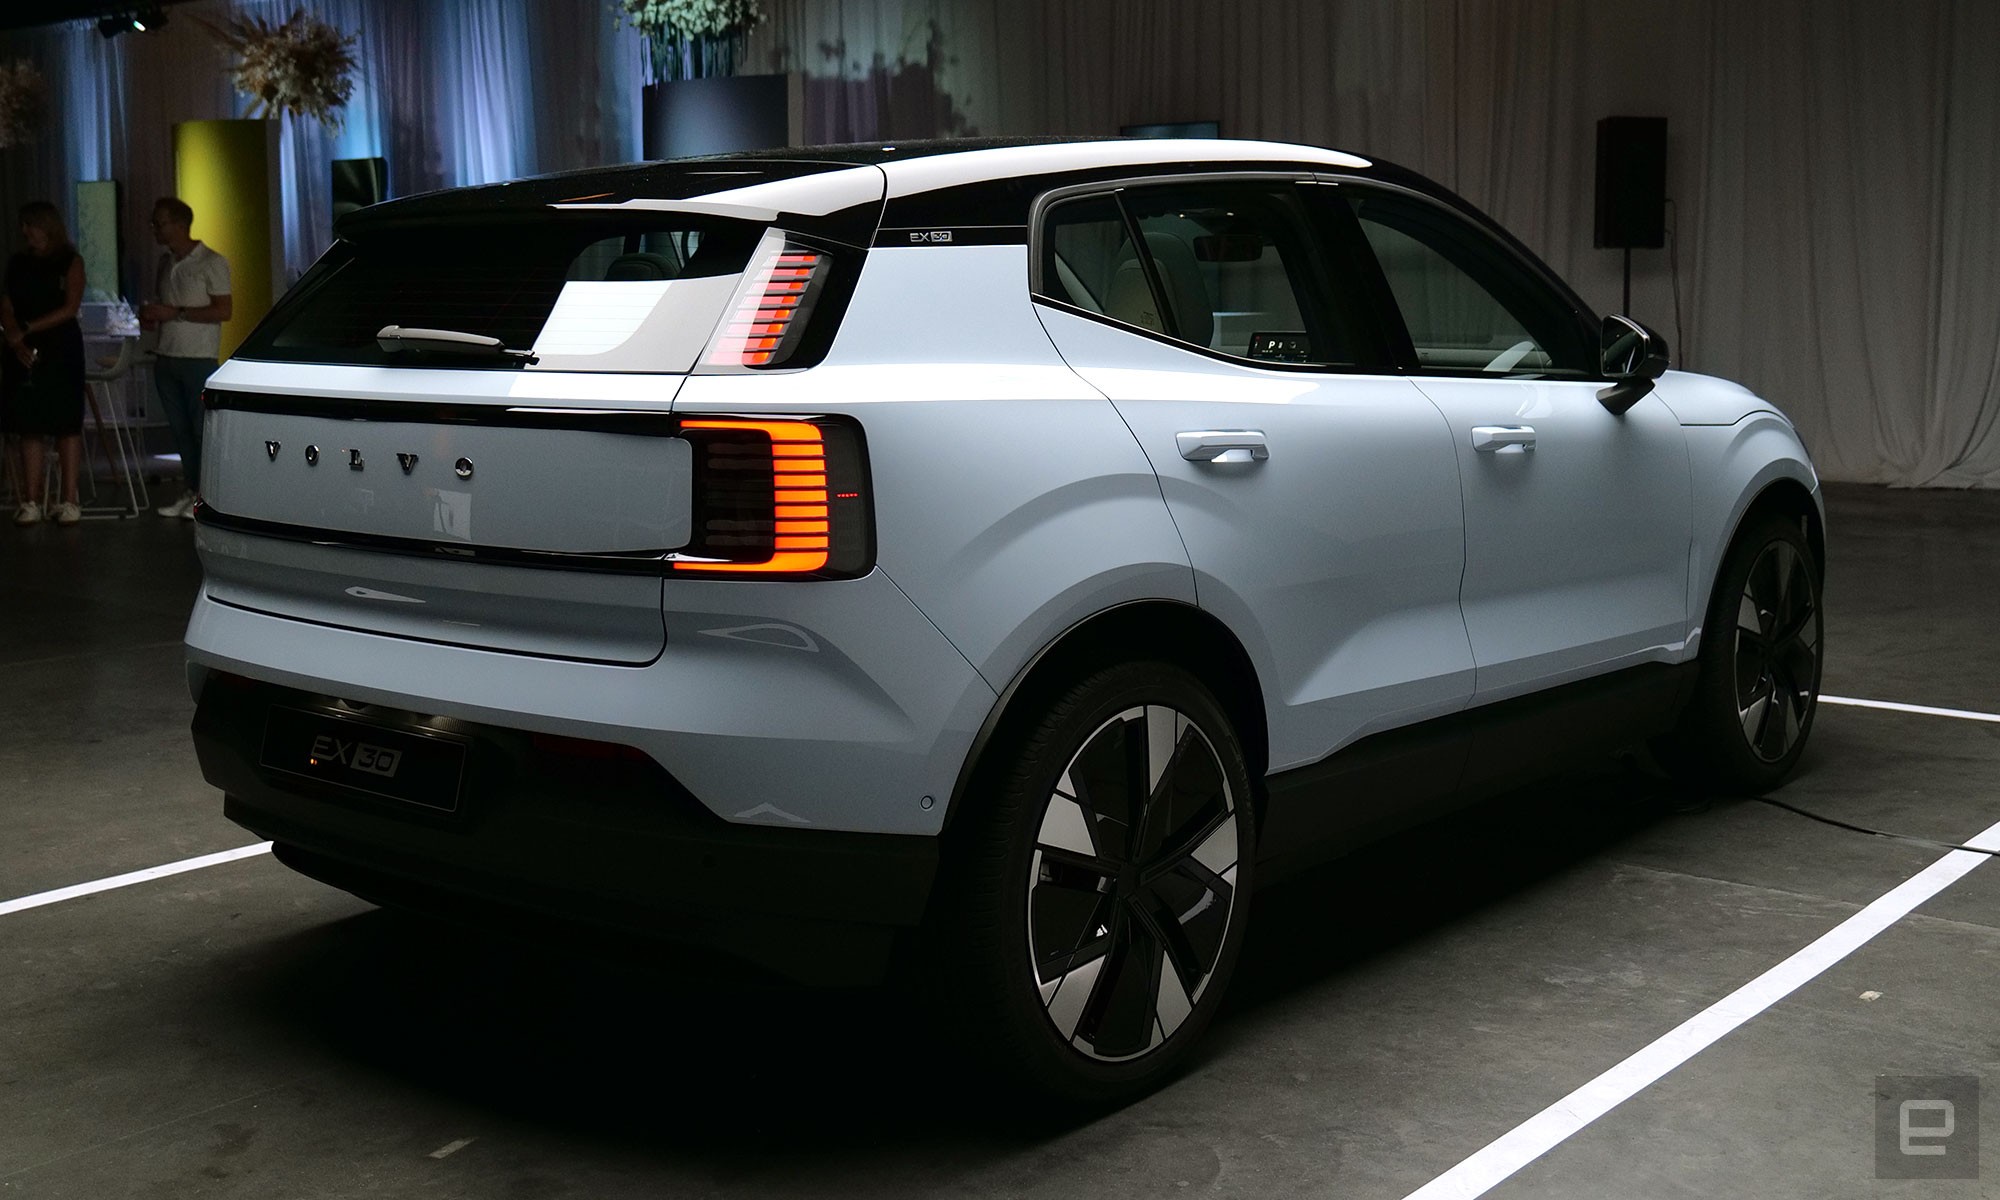 The EX30 features a similar design and many features with Volvo's flagship EX90 electric SUV, but in a more compact body.  